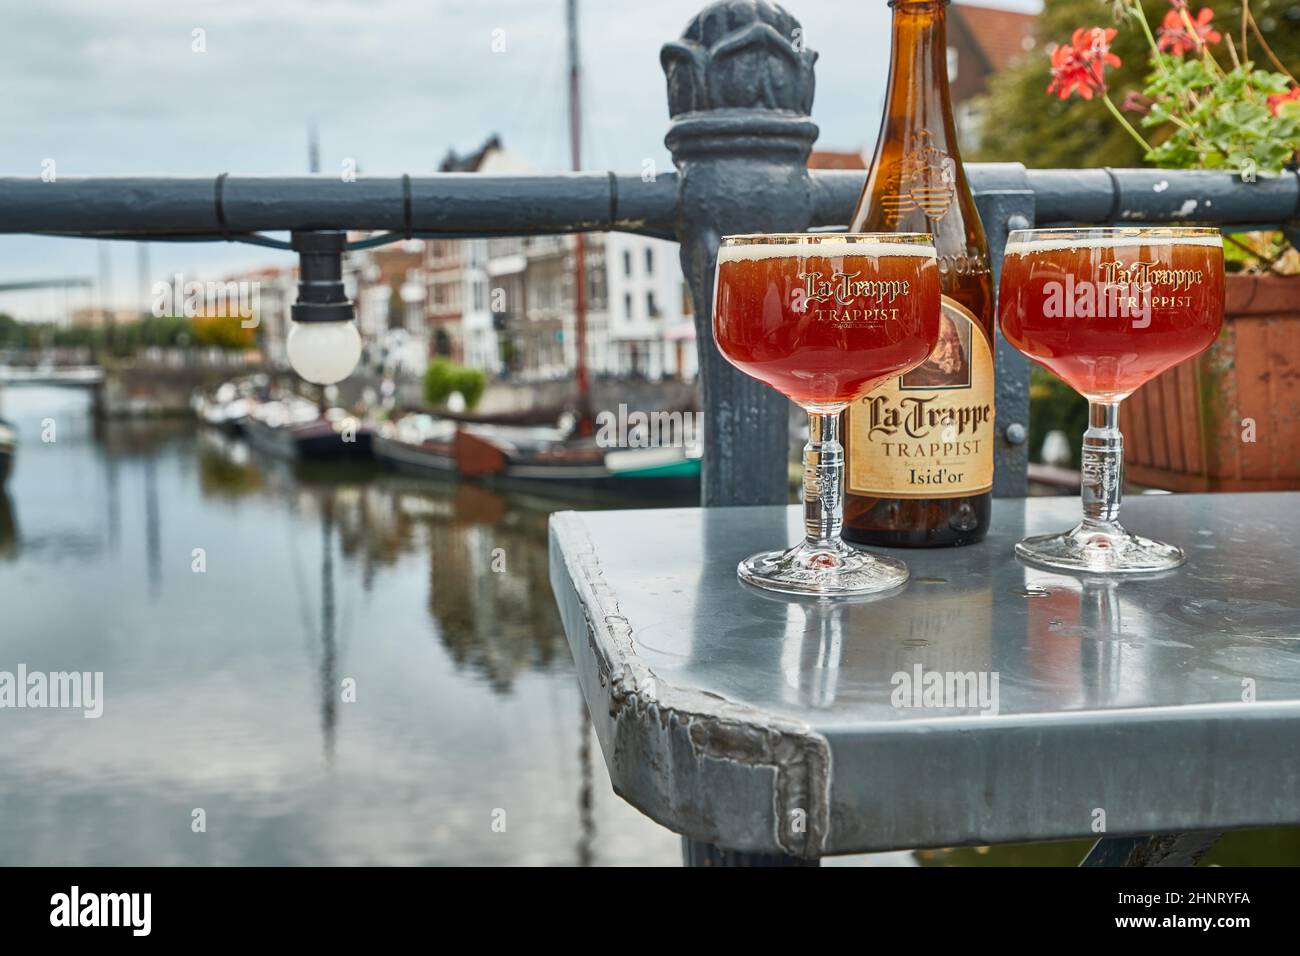 Trappist beer poured in a glass in The Netherlands Stock Photo